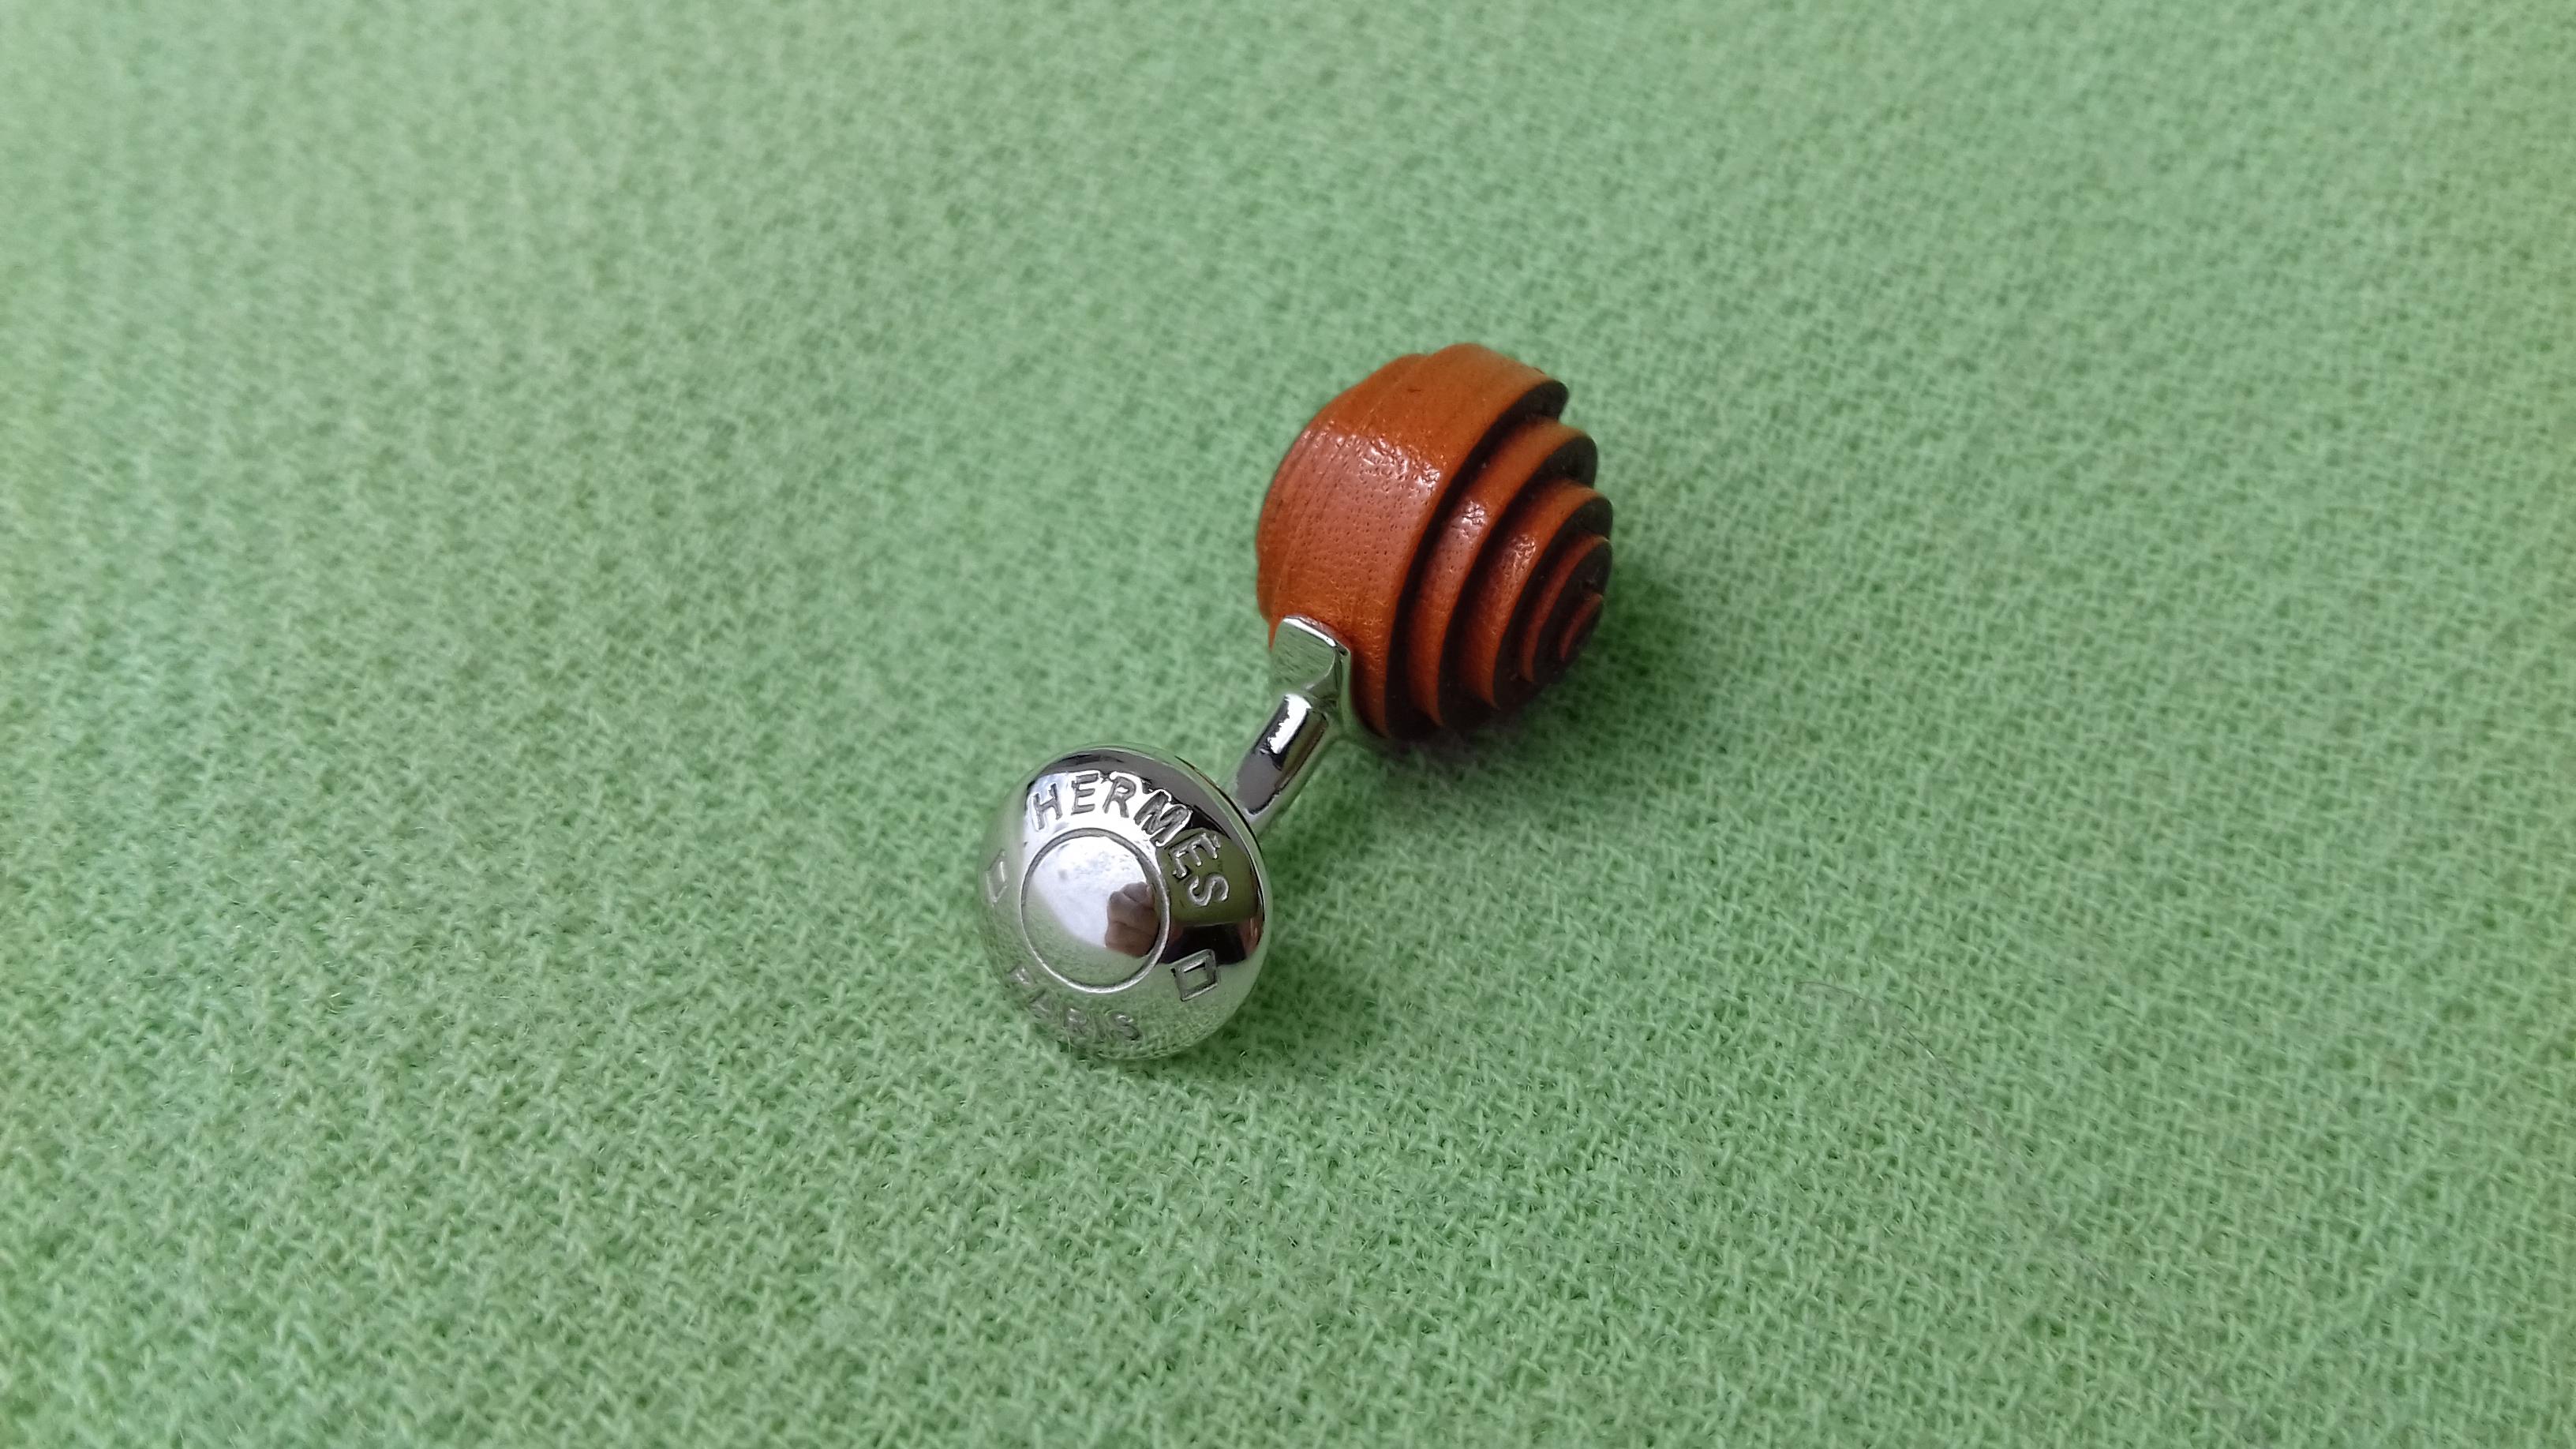 Hermès Coiled Leather and Sterling Silver Cuffs Button Snail Shaped Cufflinks  7